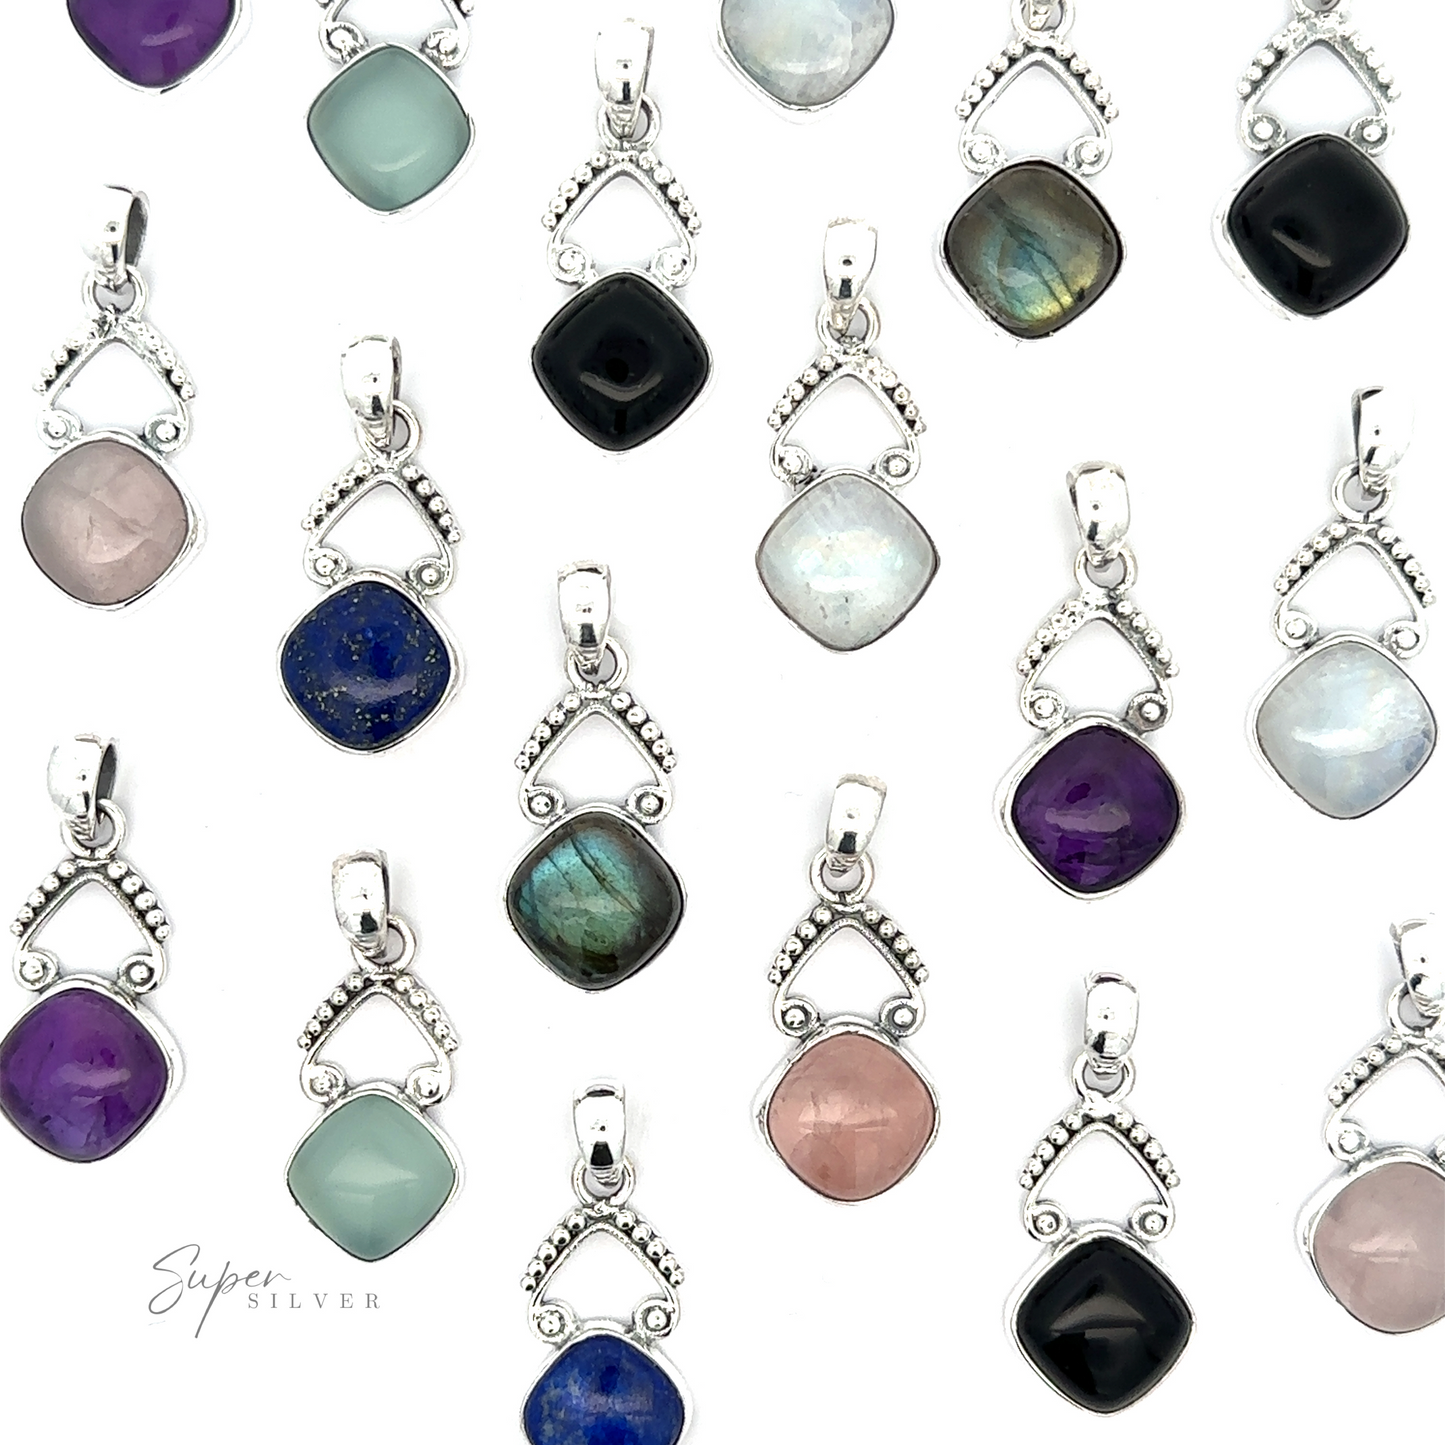 Diamond shaped gemstone pendants showcasing their vibrant colors against a clean white background, adding a bohemian flair to any ensemble.